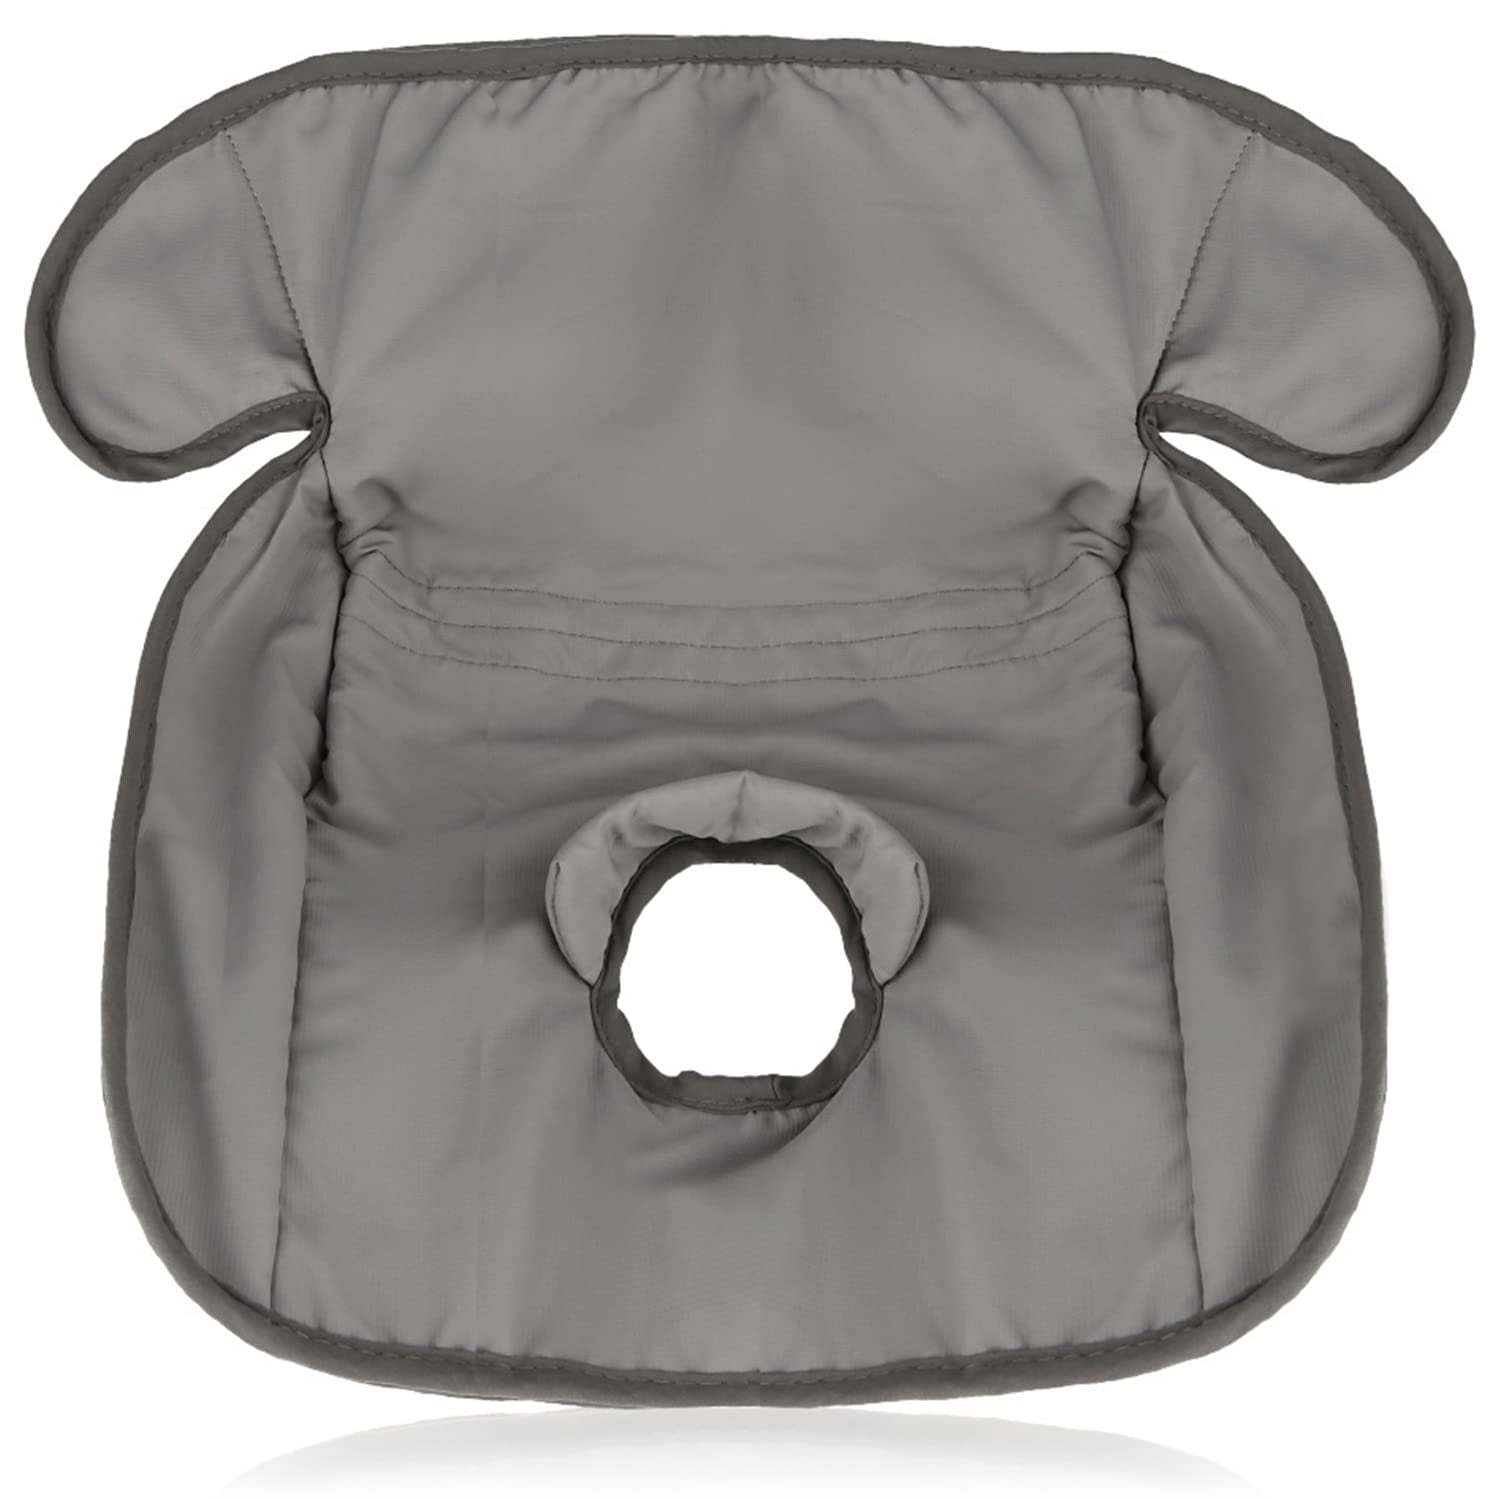 Leak-Free Piddle Pad for Potty Training Toddlers Stroller & Dinner Chair Grey Infant Trobo Car Seat Cover Machine Washable Anti-Slip Vinyl Backing Waterproof Car Seat Protector Liner for Child 